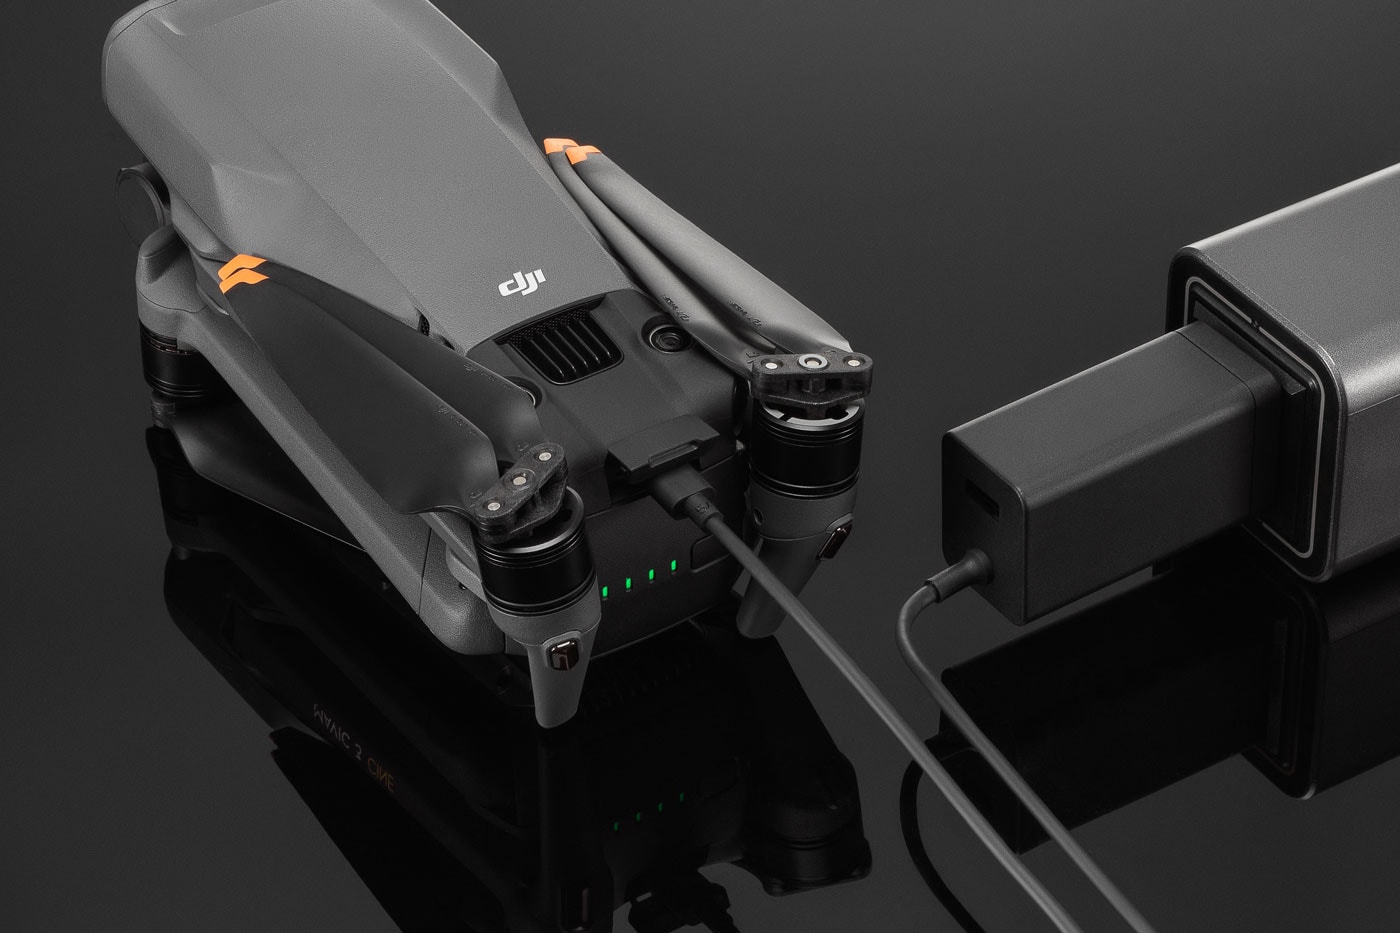 DJI Mavic 3 CINE hasselblad drone release aerial cinematography Tech video 4K flying flight imaging fly more combo 